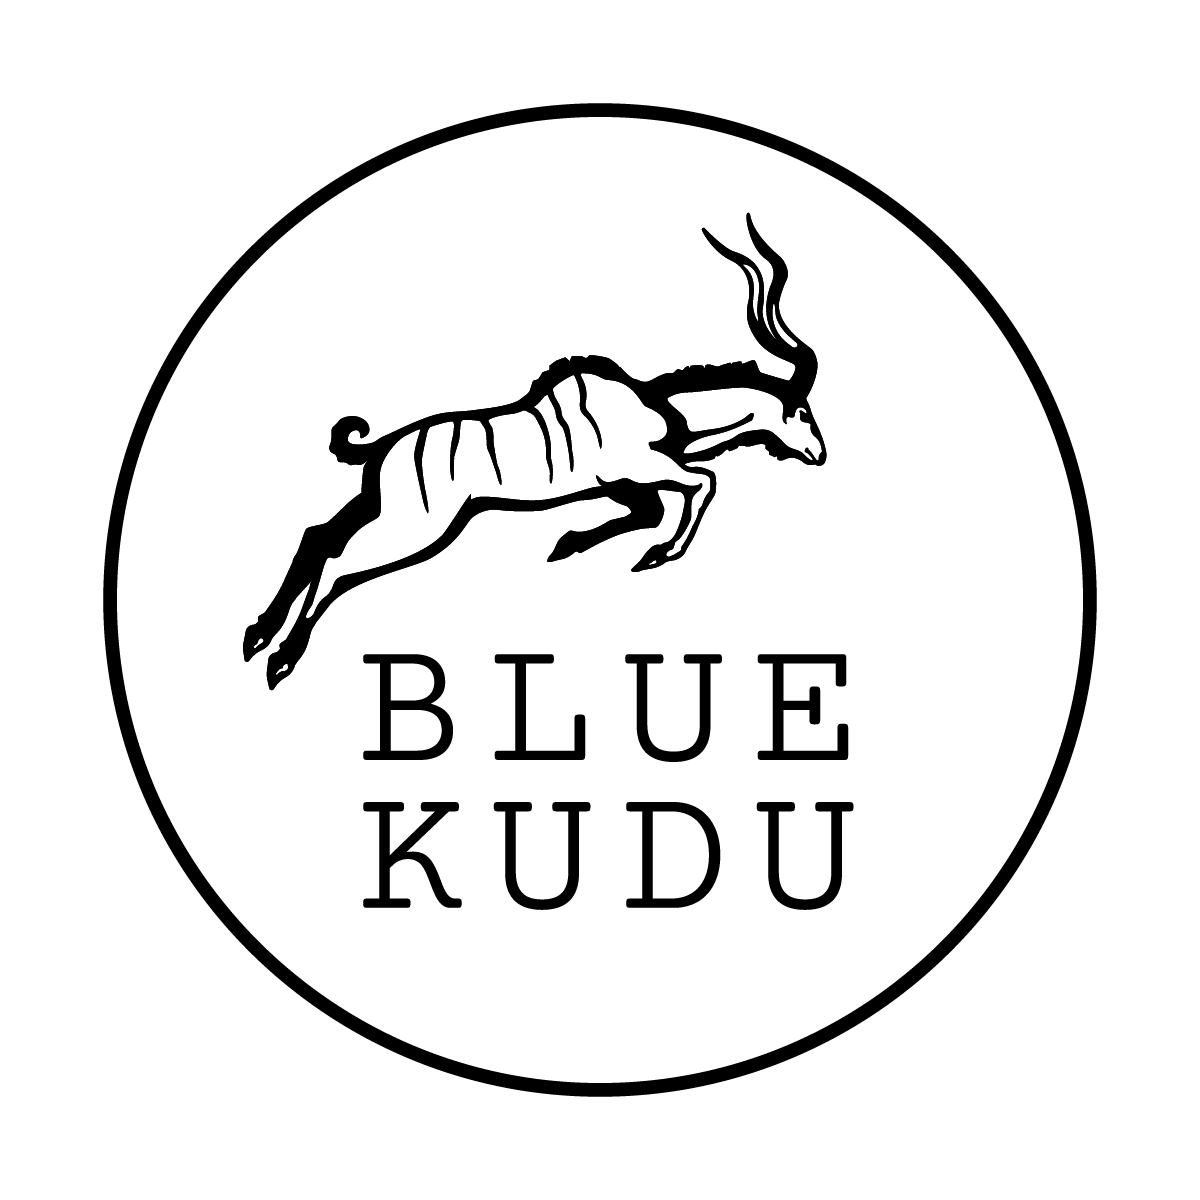 edible-blue-kudu-craters-of-the-moon-100mg